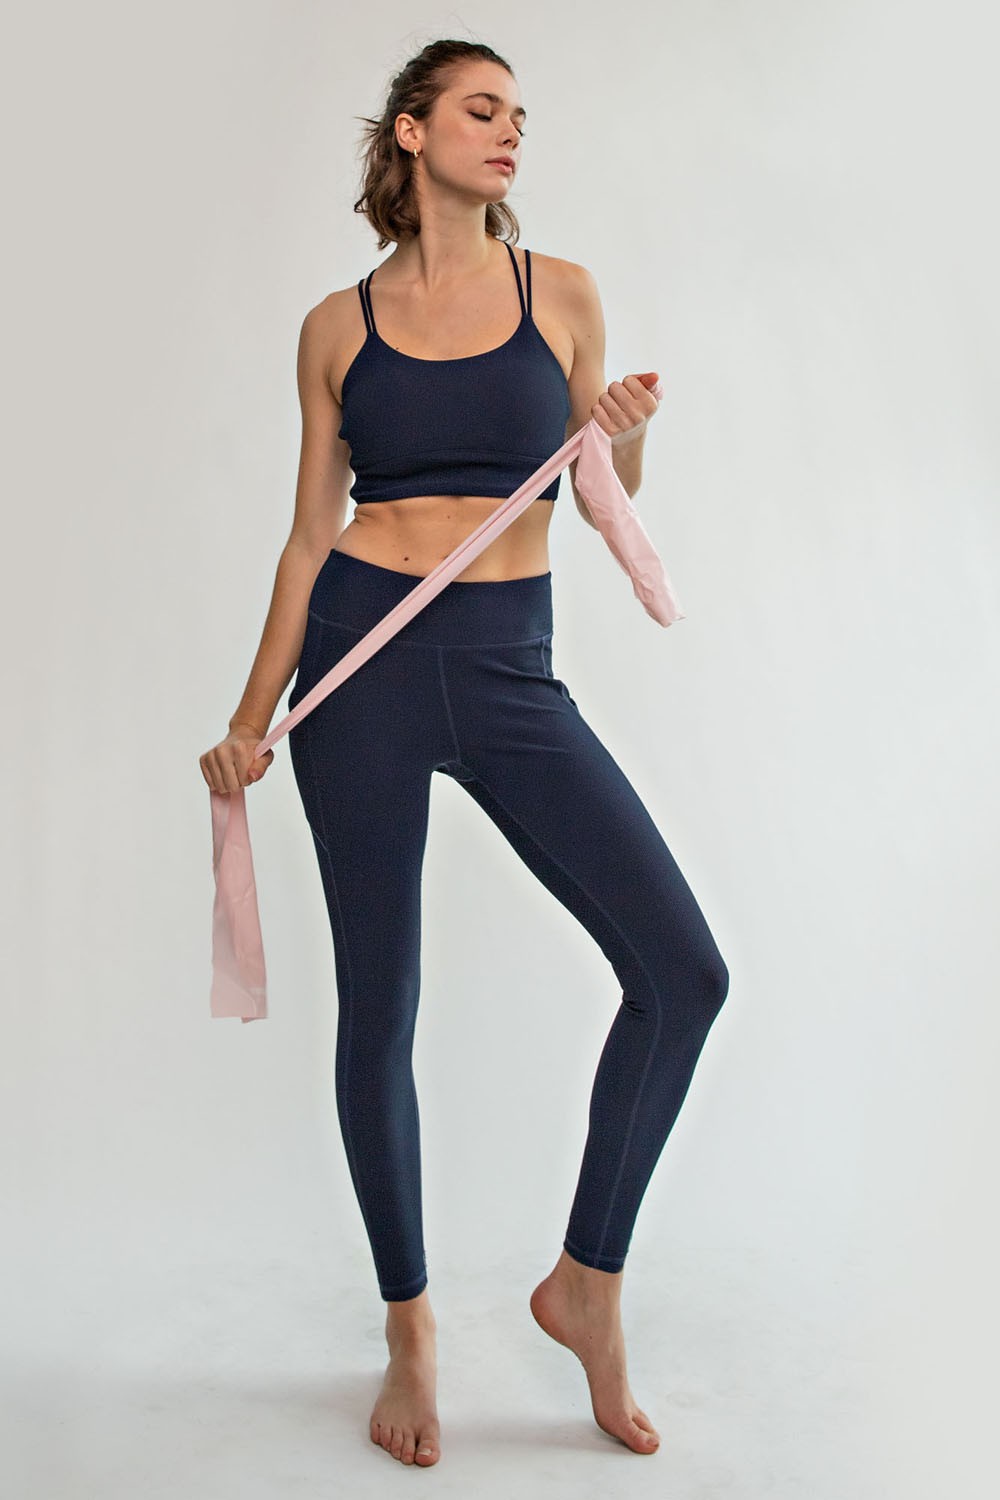 Ribbed Yoga Pants with Pockets in. Black